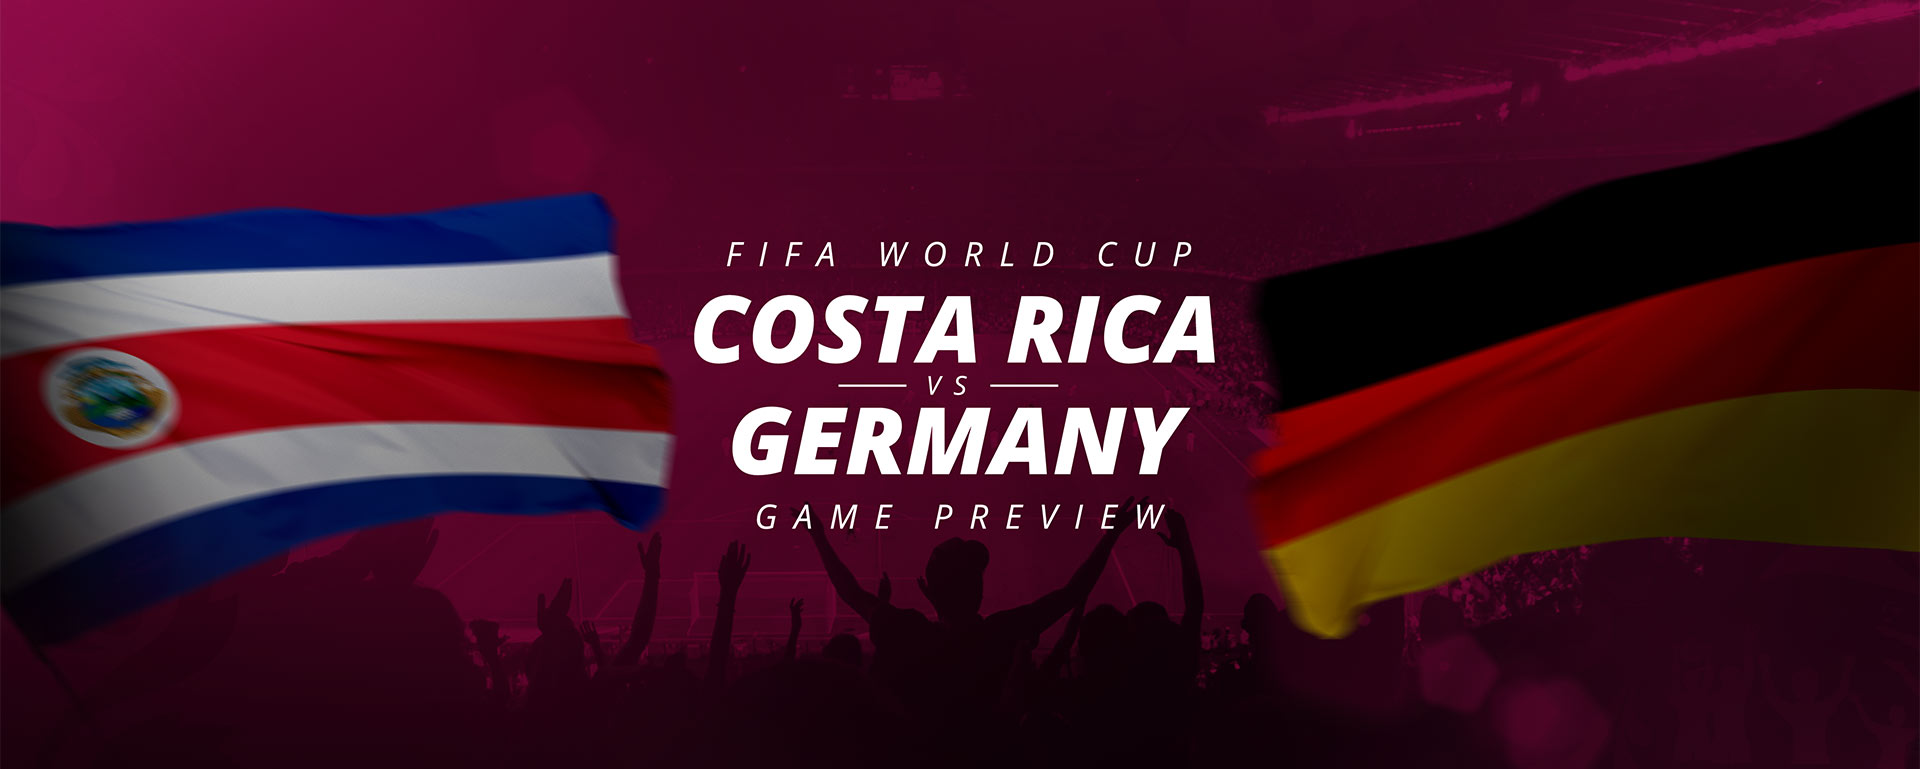 FIFA WORLD CUP: COSTA RICA V GERMANY – GAME PREVIEW